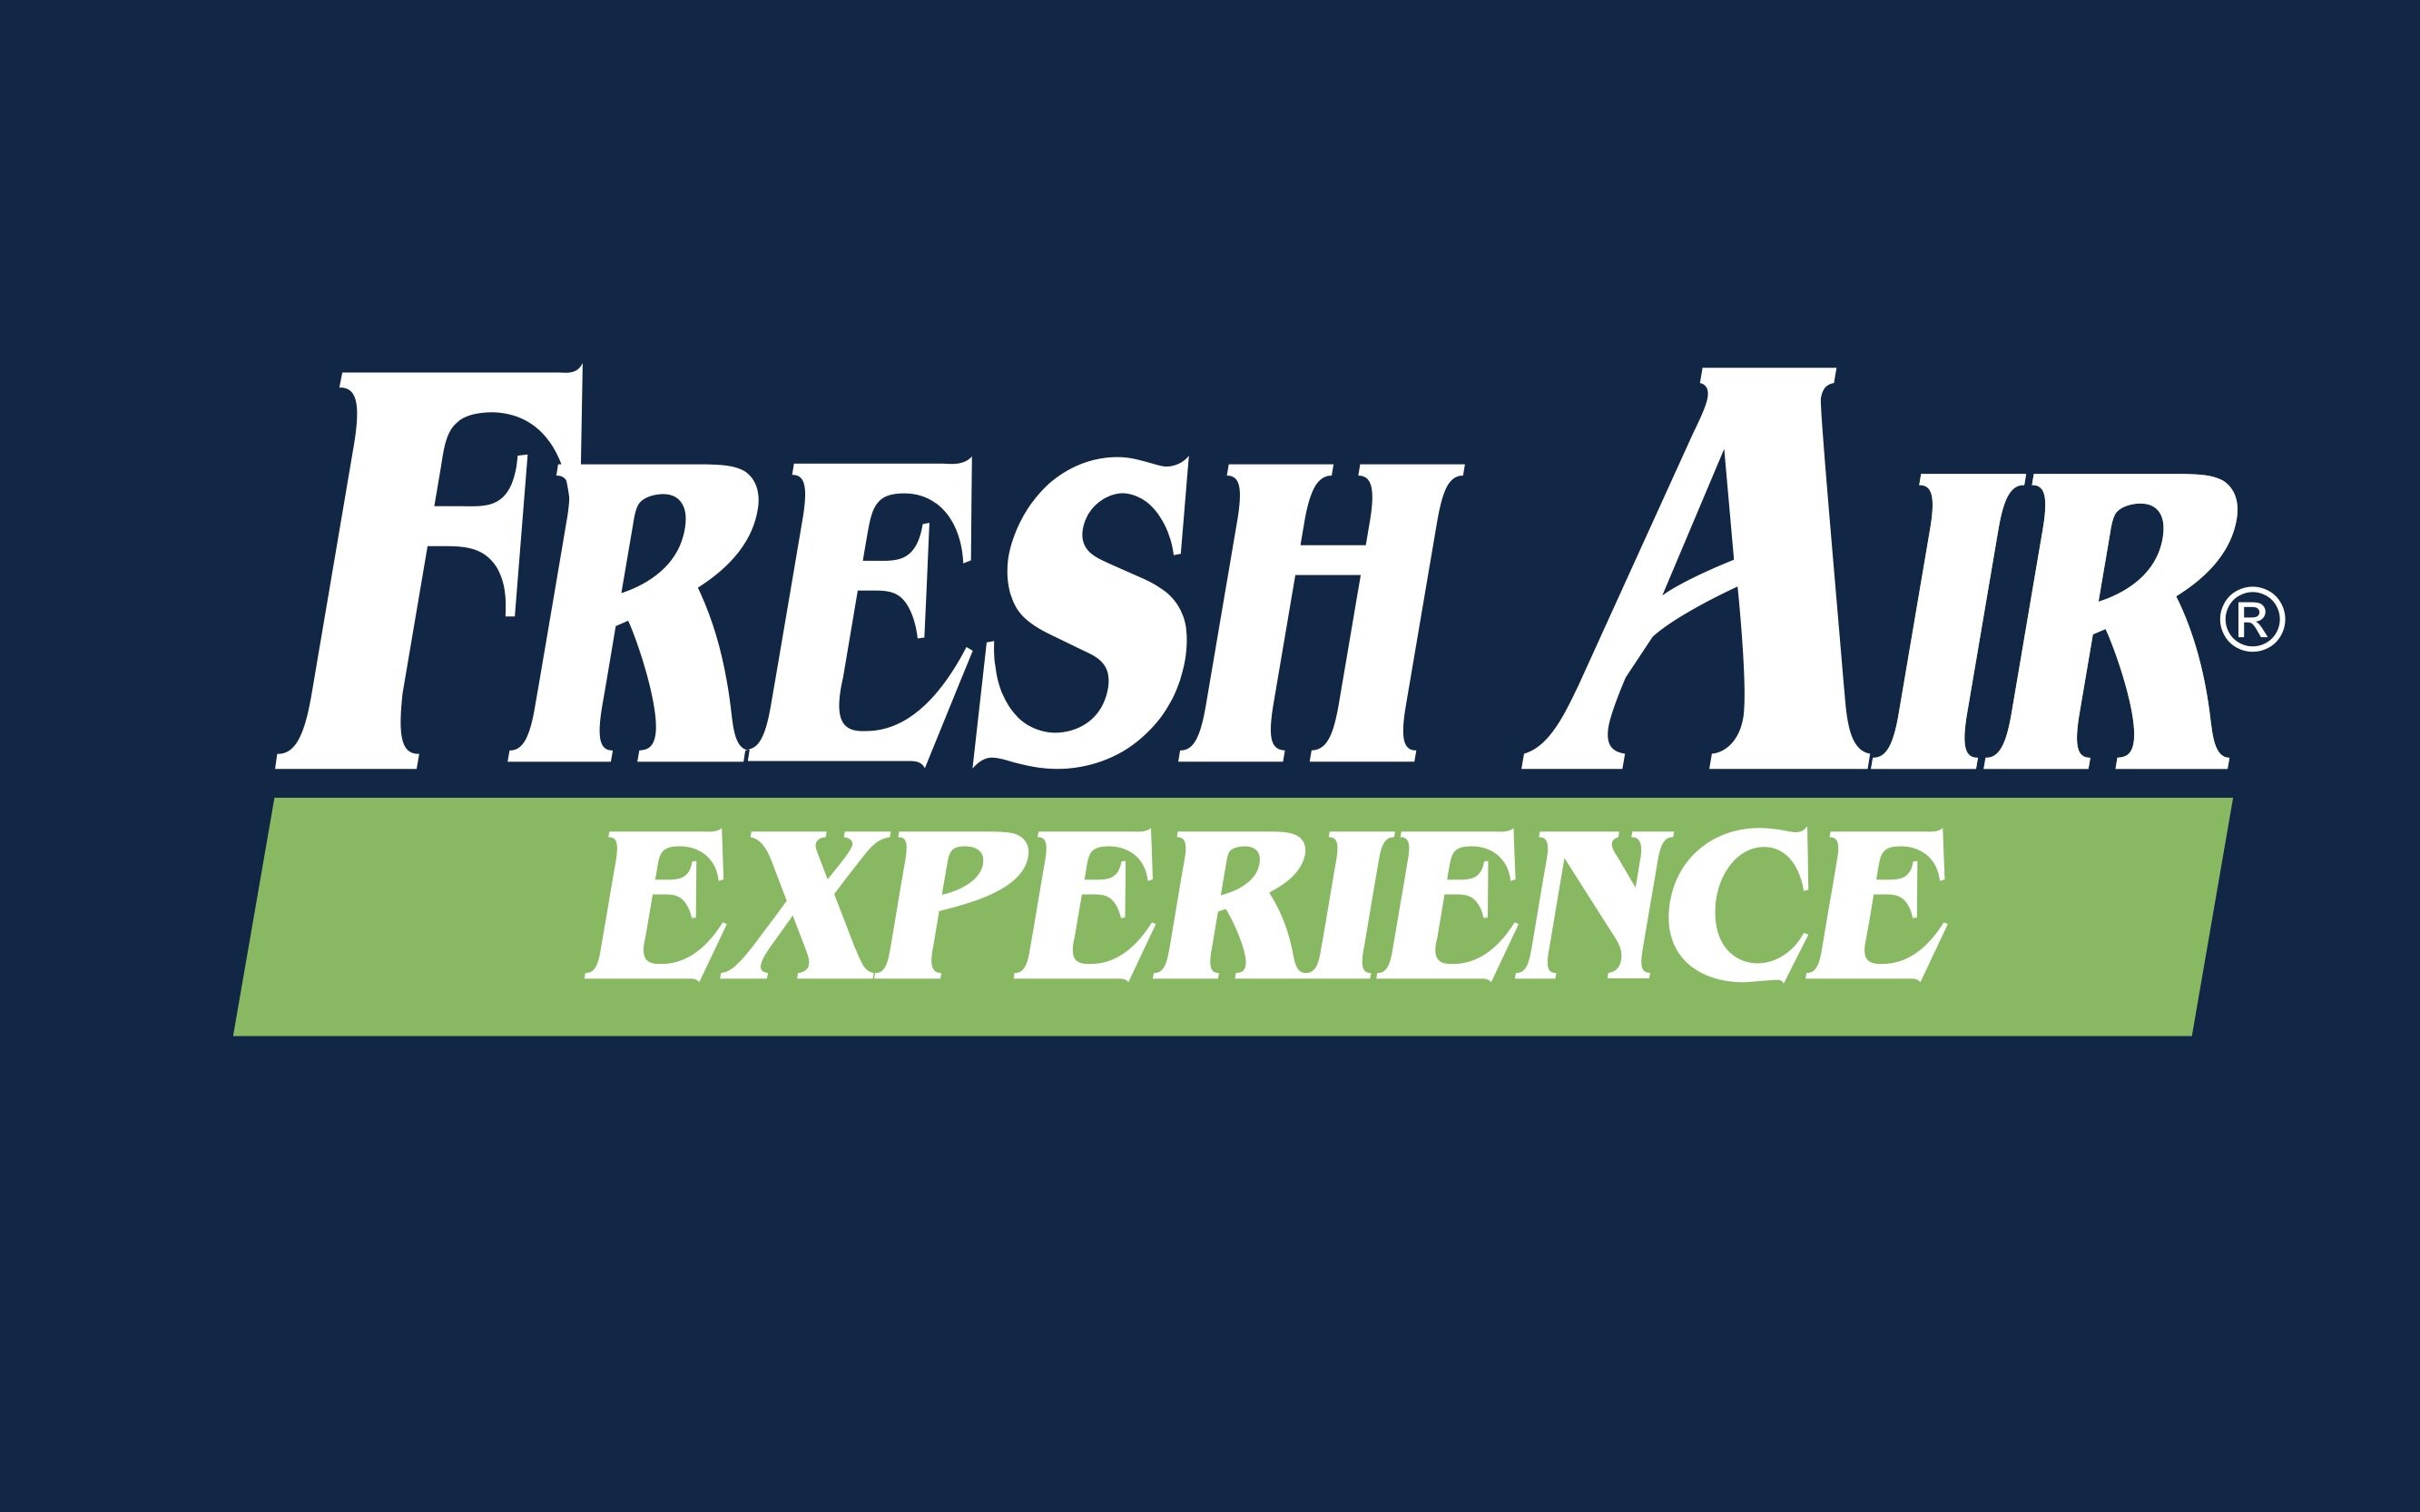 More about Fresh Air Experience